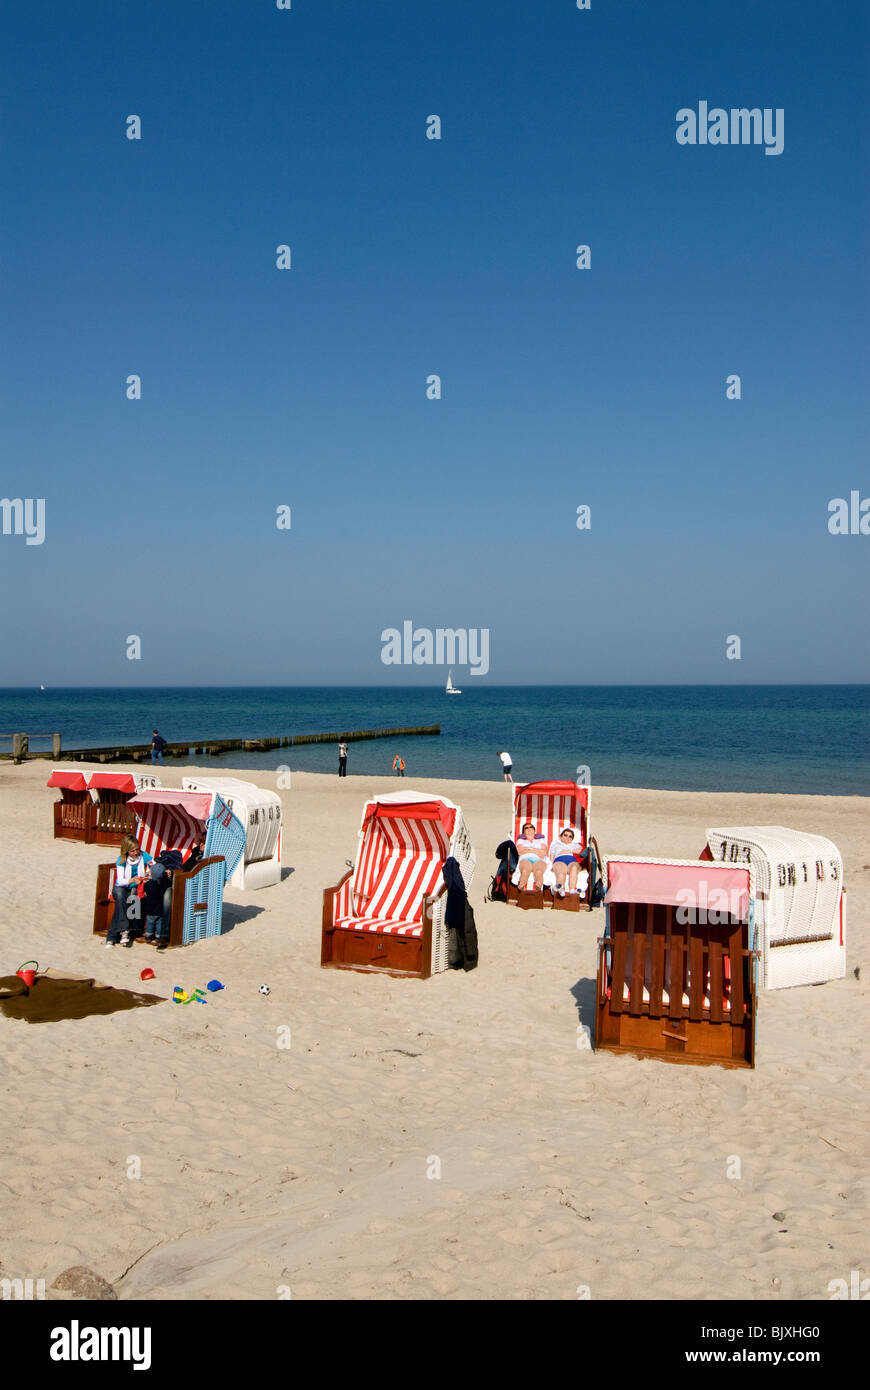 Beach chairs at the beach of Kuehlungsborn, Germany, Baltic Sea, Mecklenburg-Western Pomerania. Stock Photo